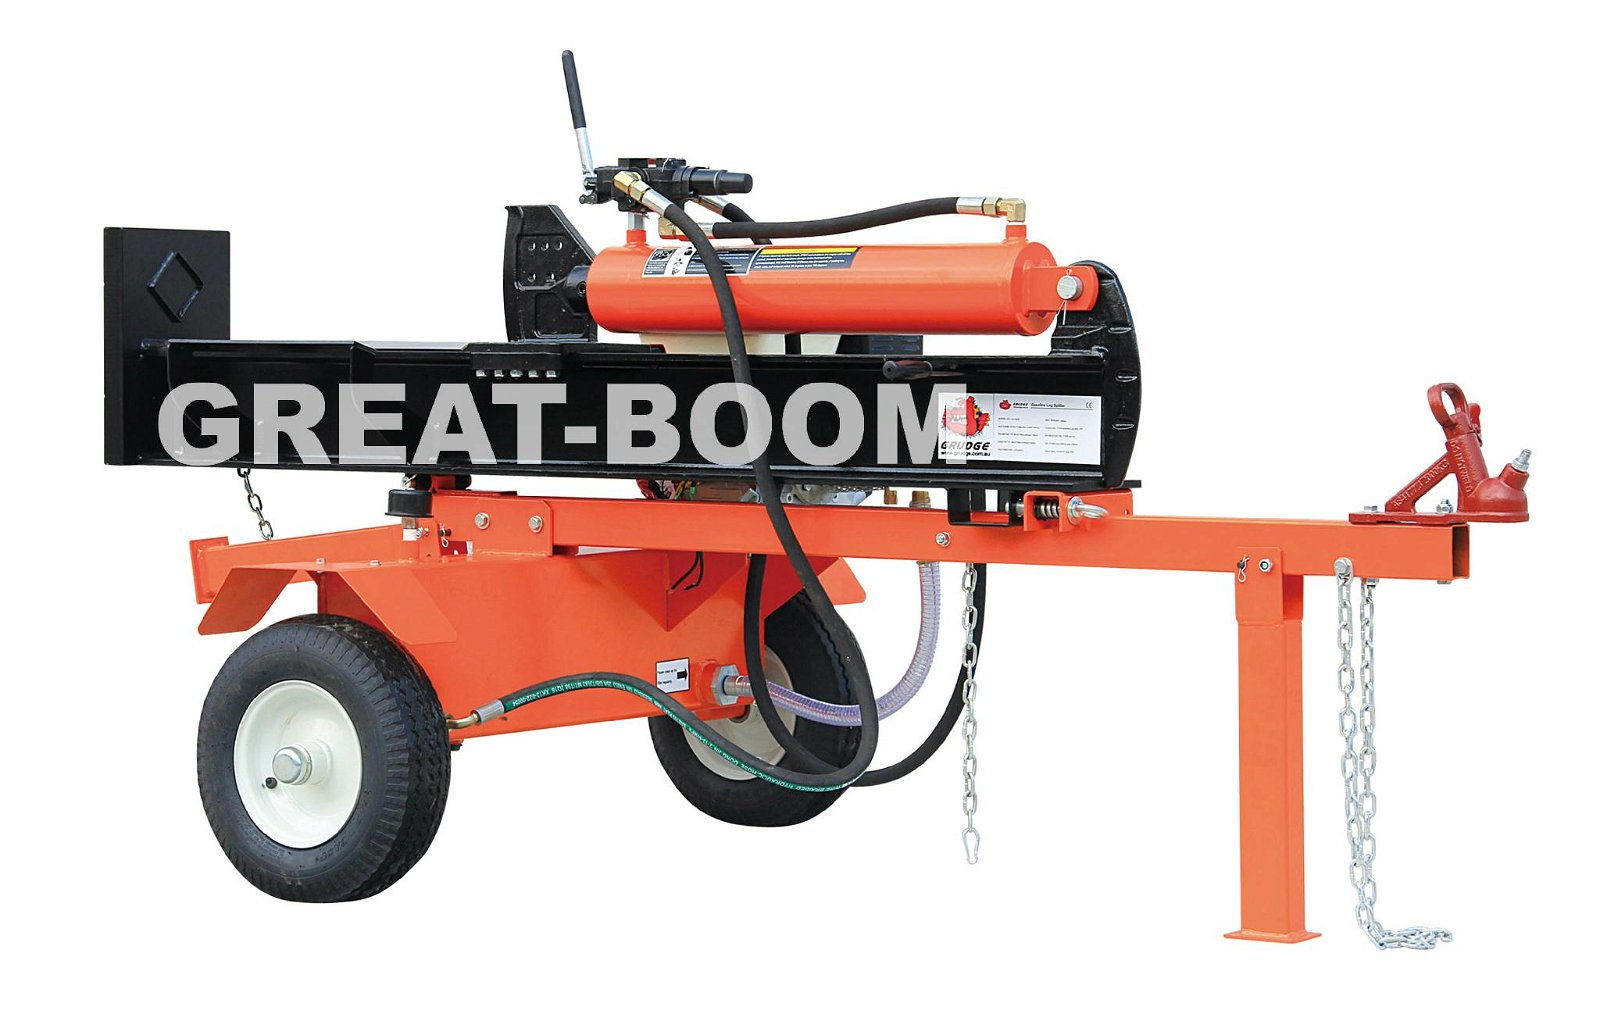 CE approved cheap new wood log splitter for sale 4